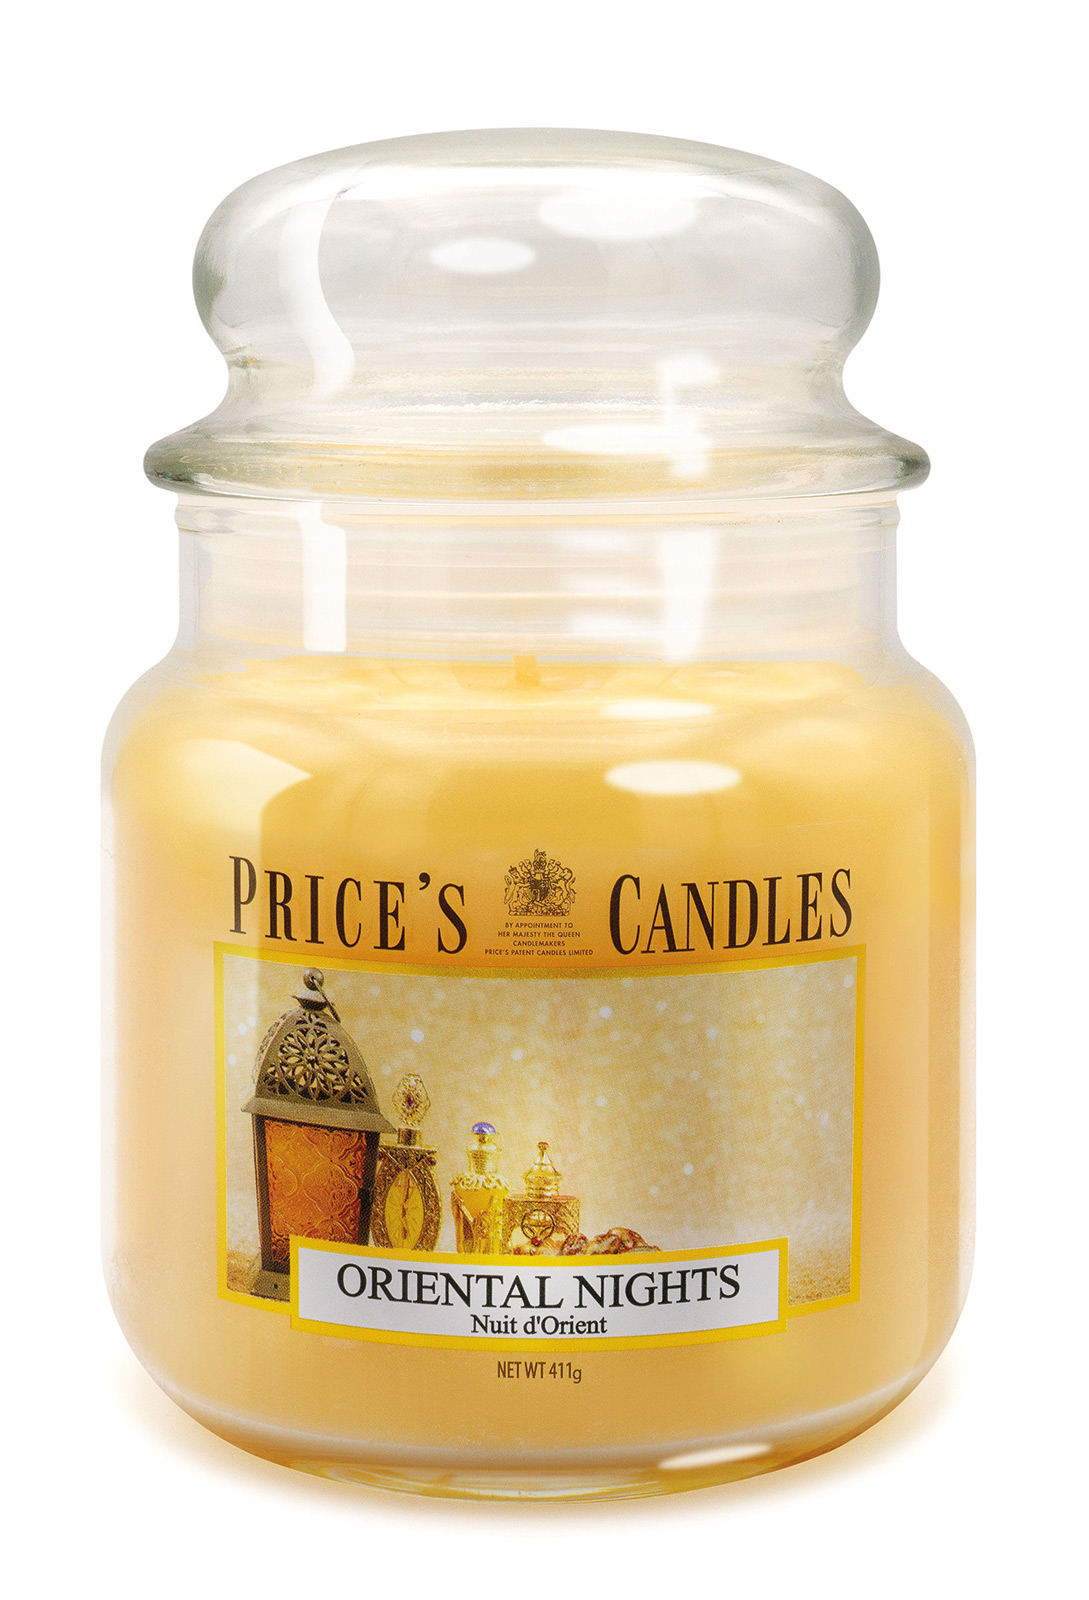 Prices Candle "Oriental Nights" 411g  